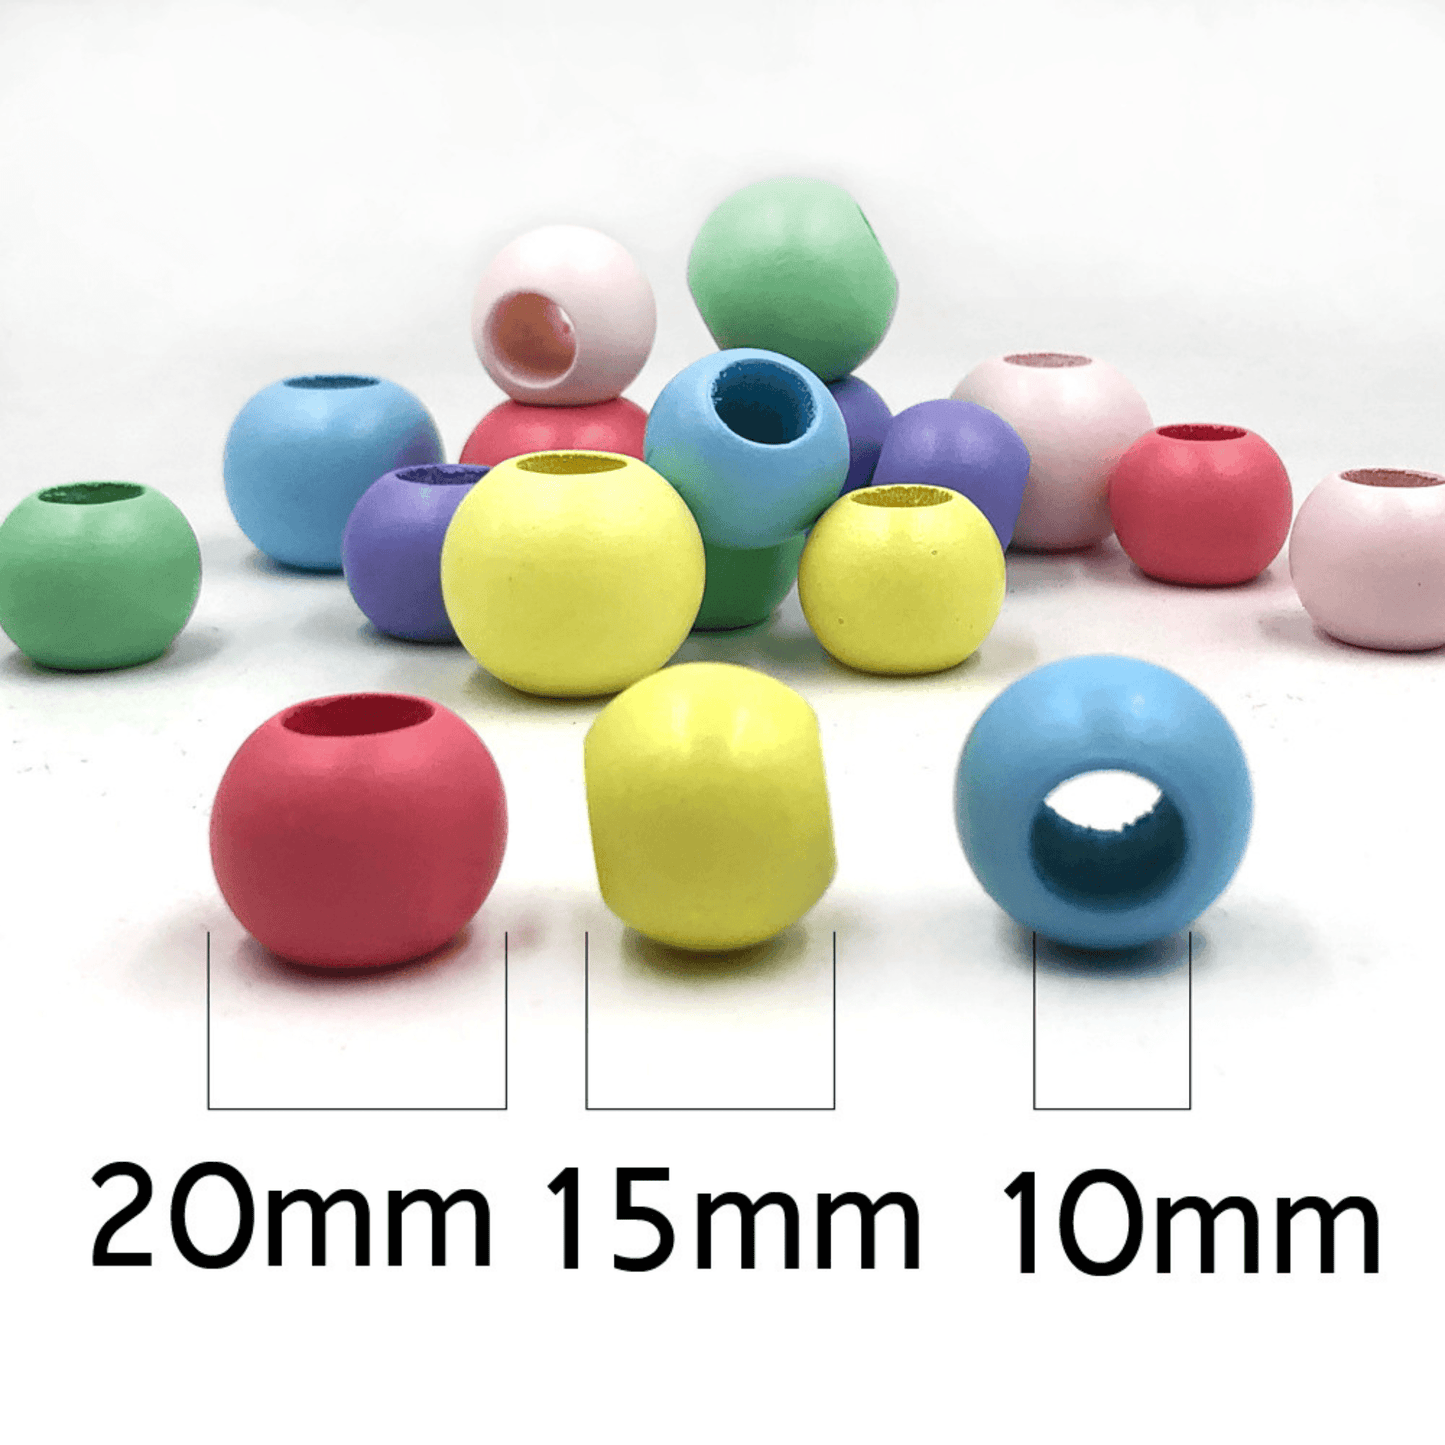 Pastel Coloured Smooth Beads // 20mm x 15mm // Hole 10mm // 12 or 24 pack - Cottonknotsxx